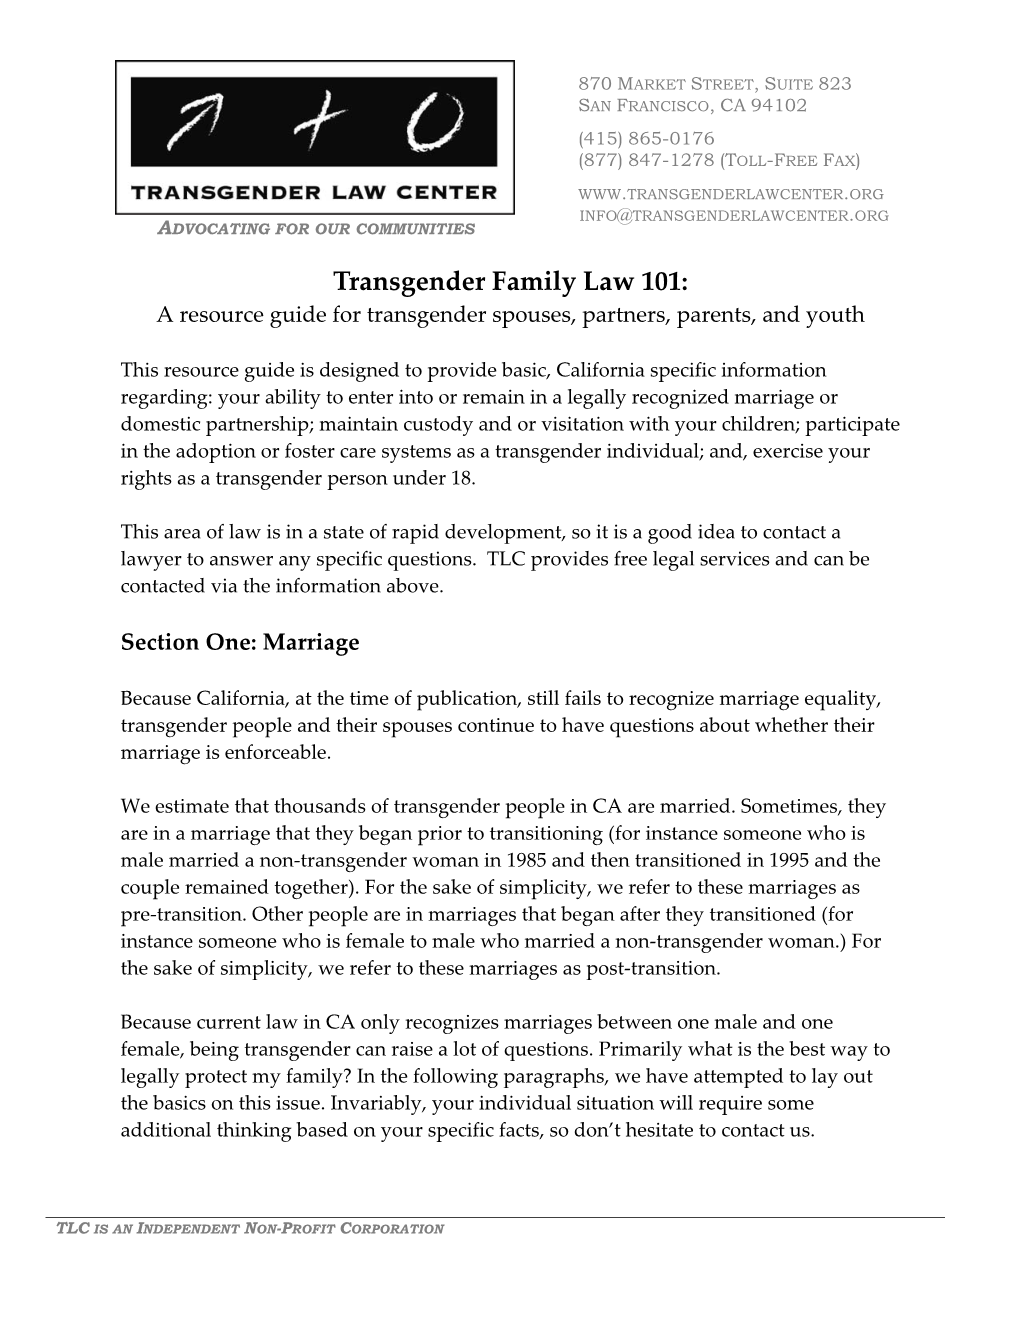 Transgender Family Law 101: a Resource Guide for Transgender Spouses, Partners, Parents, and Youth